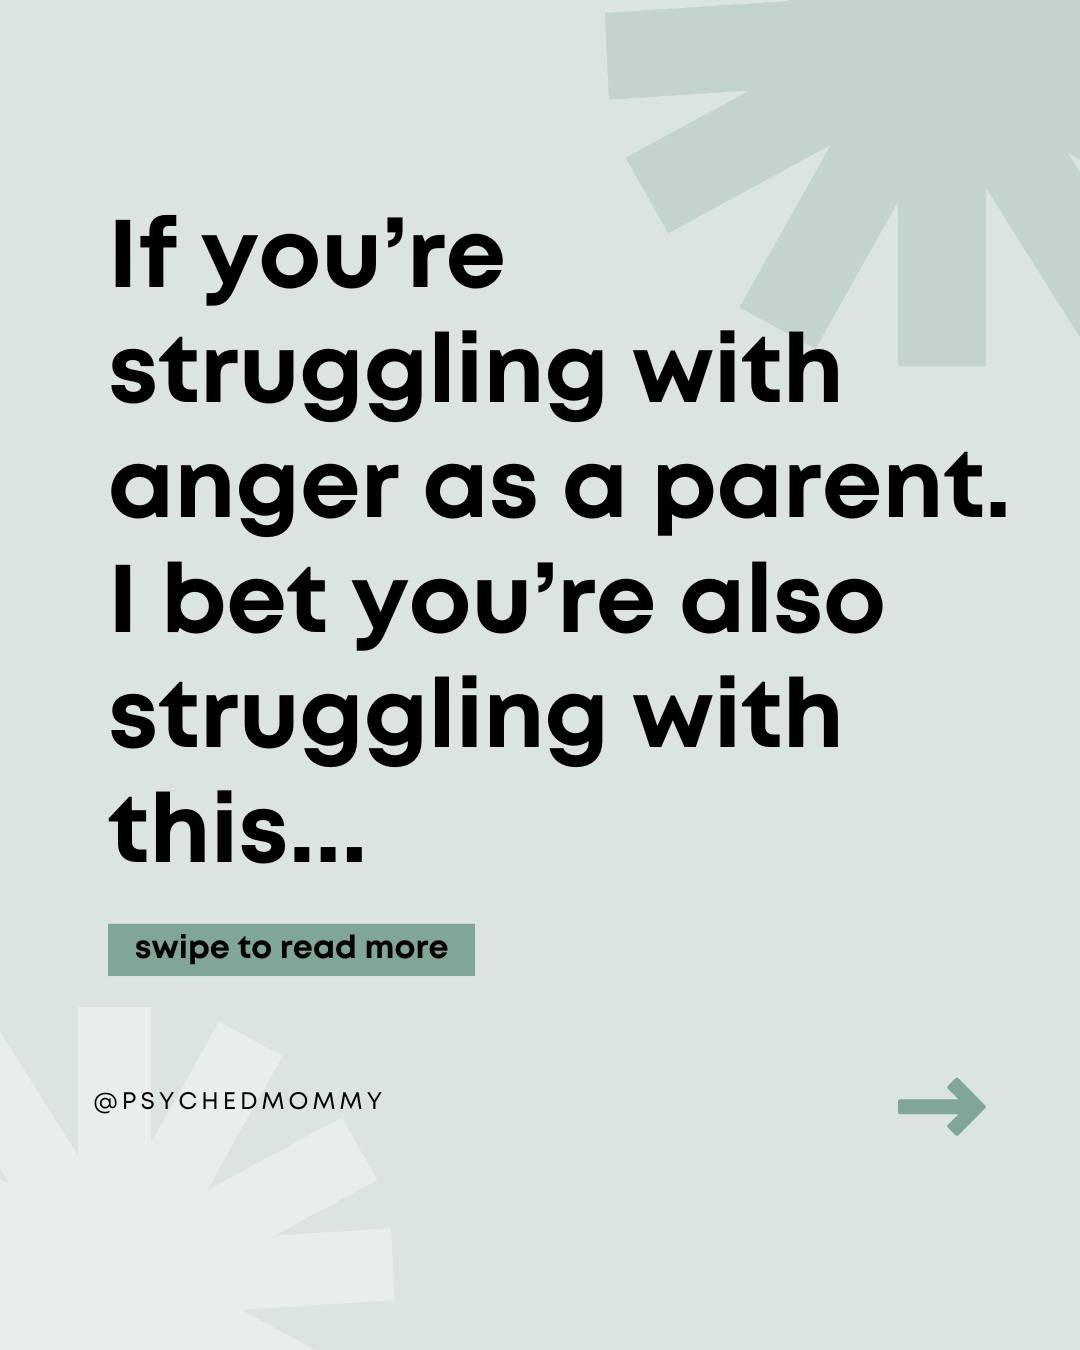 Which one do you relate to the most?

We may be blindsided by the presence of anger in our parenthood journey. We&rsquo;ve been encouraged to enjoy every second. We&rsquo;ve been told we&rsquo;ll miss these days, but rarely have we been cautioned abo